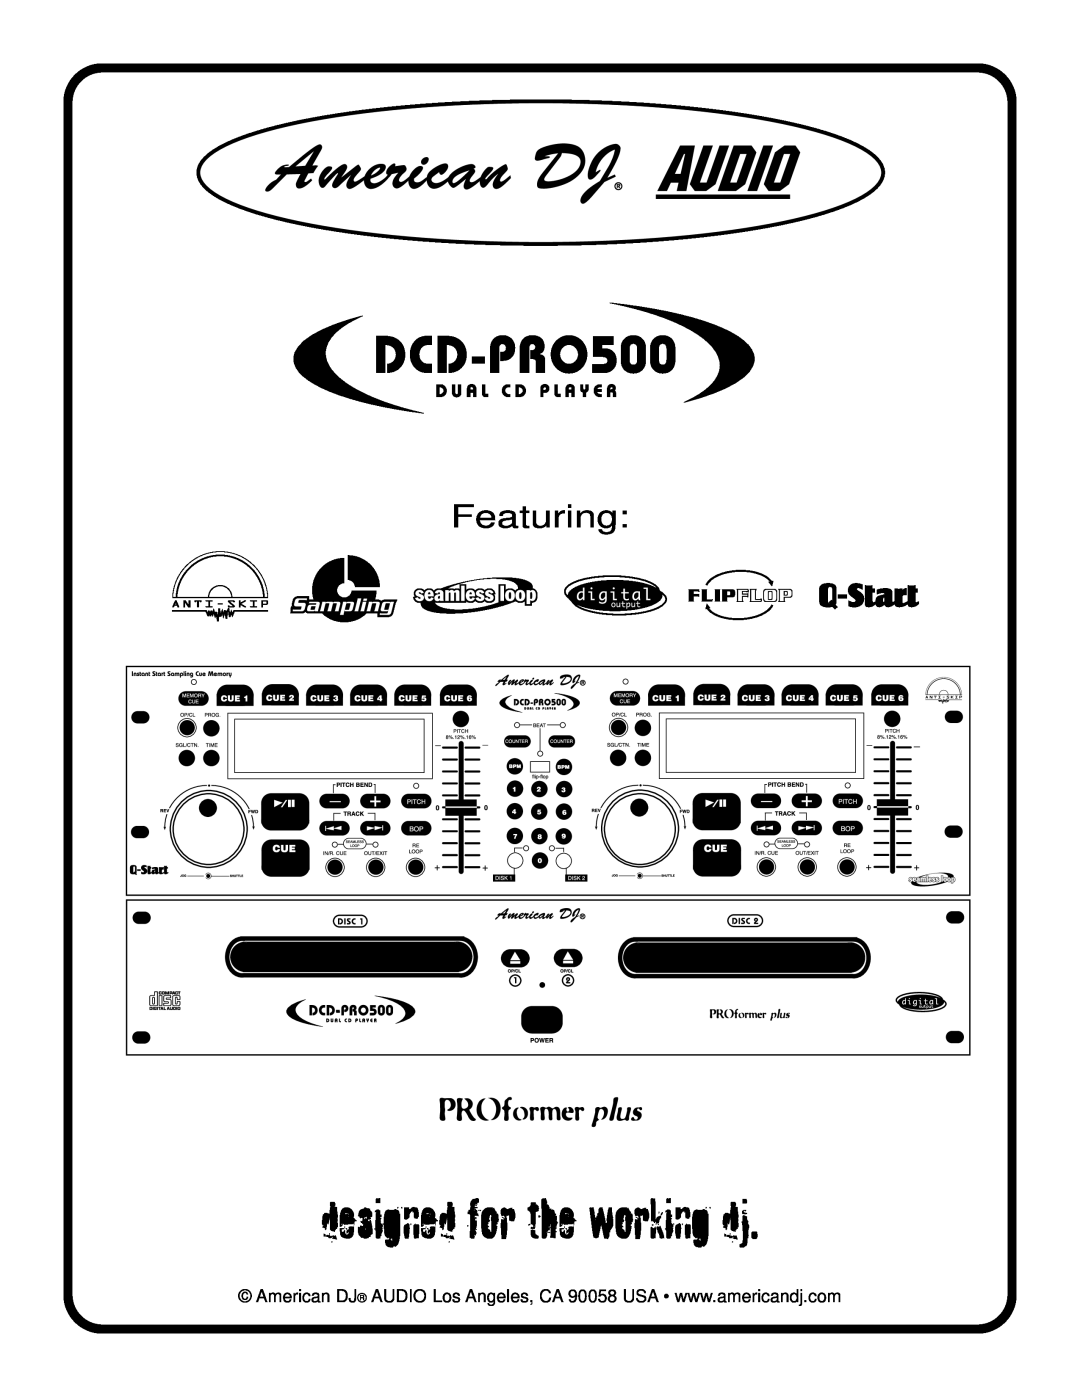 American Audio DCD-PRO500 manual designed for the working dj, Featuring, Sampling, Flipflop 